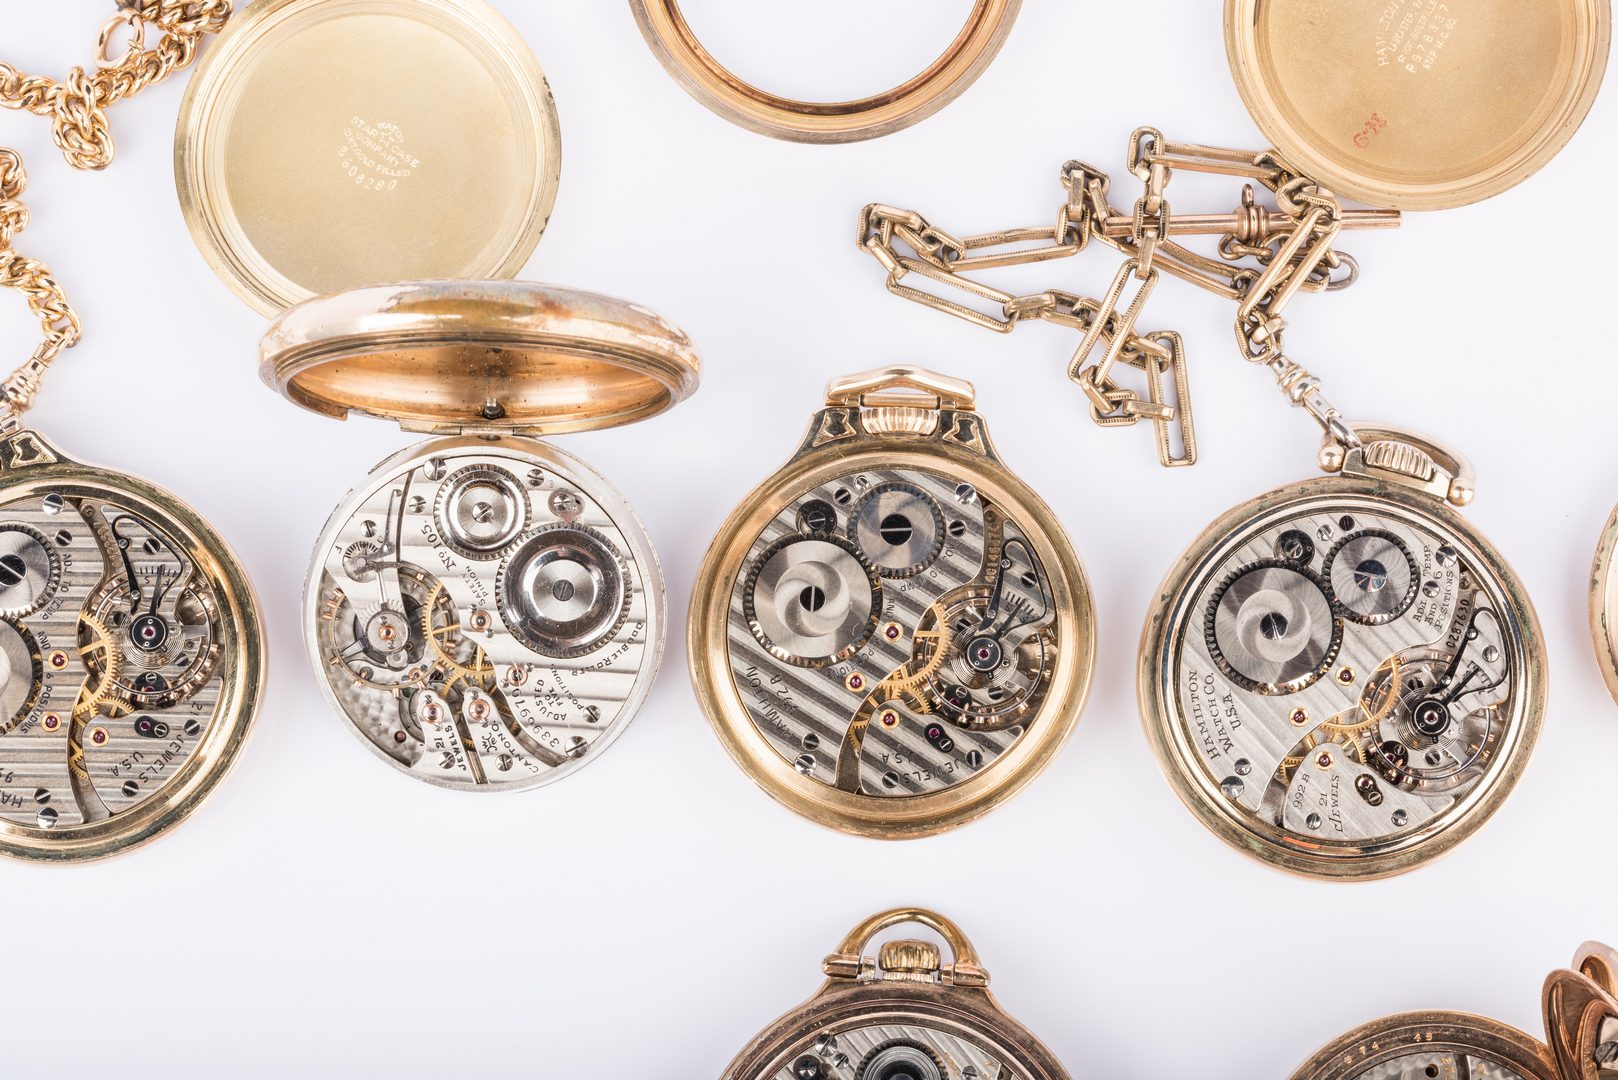 Lot 854: Group 6 Railway Pocket Watches plus 1 (7 total)